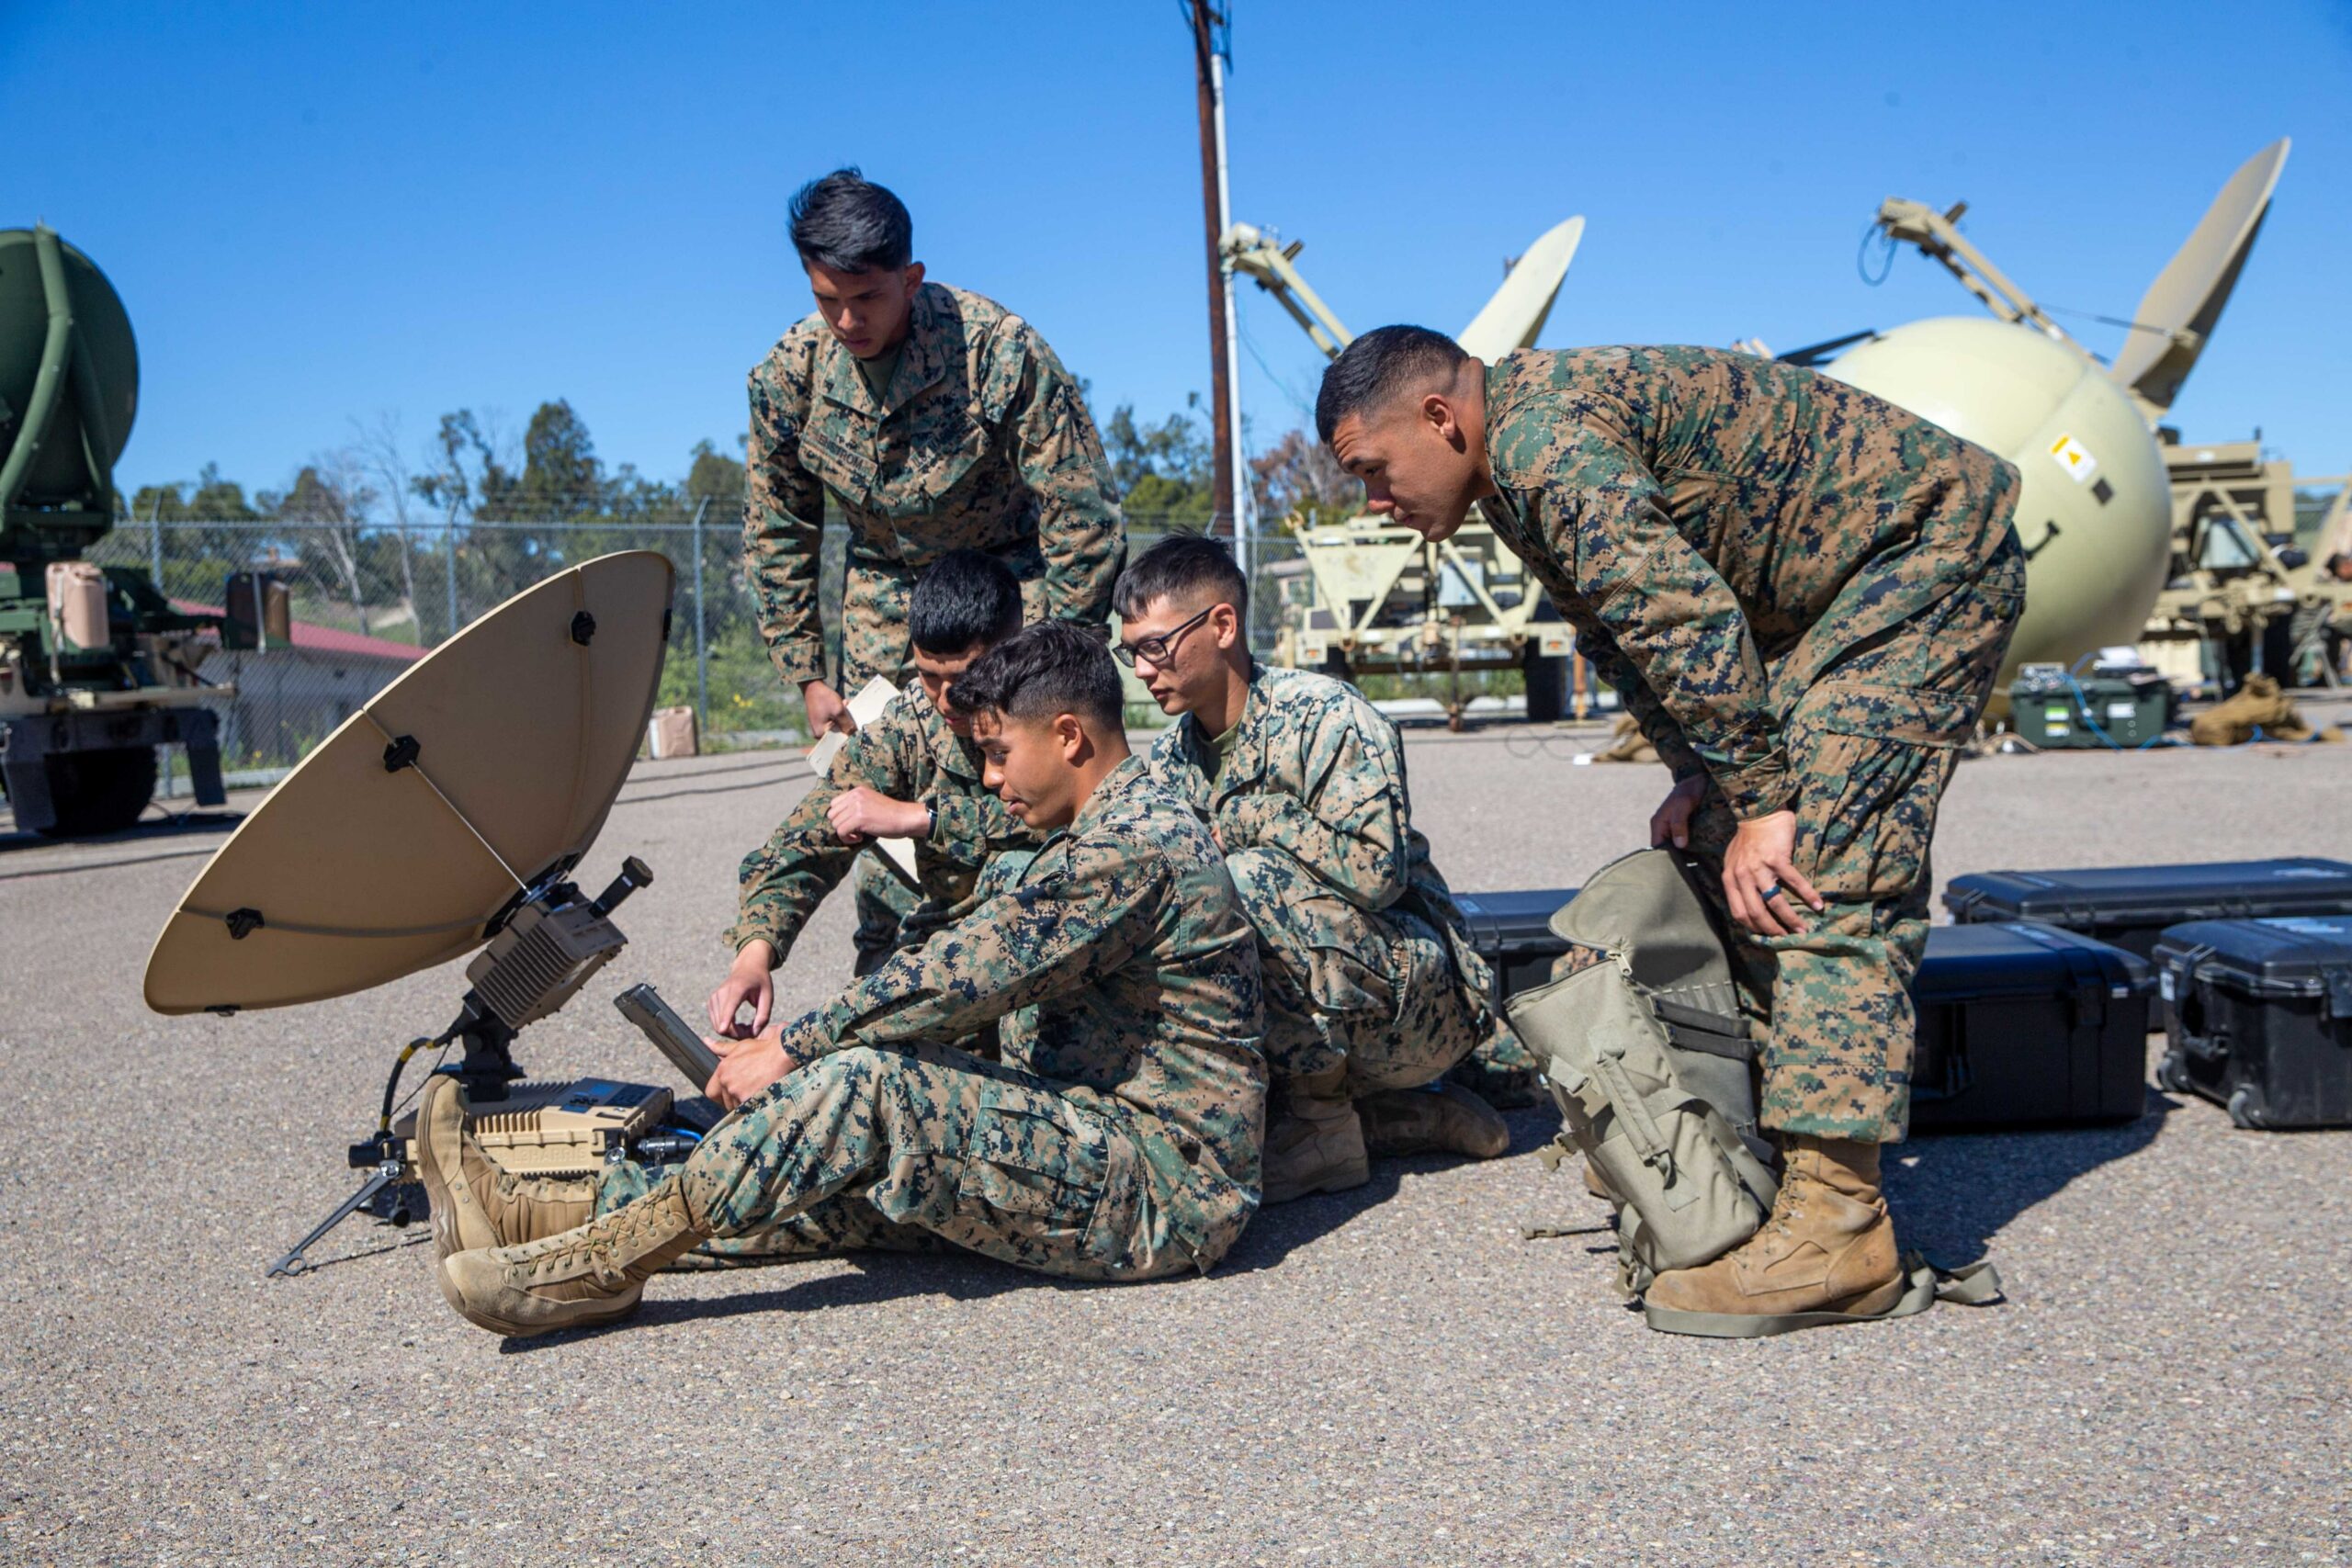 U.S. Marines with 9th Communication Battalion, I Marine Expeditionary Force Information Group, troubleshoot the Marine Corps Wideband Satellite Communications - Expeditionary at Marine Corps Base Camp Pendleton, California, March 11, 2022. This training allows the 9th Communication Battalion to be capable of operating, defending, and preserving information networks to enable command and control for the commander in all domains, and support and conduct Marine Air Ground Task Force operations in the information environment. (U.S. Marine Corps photo by Cpl. Alize Sotelo